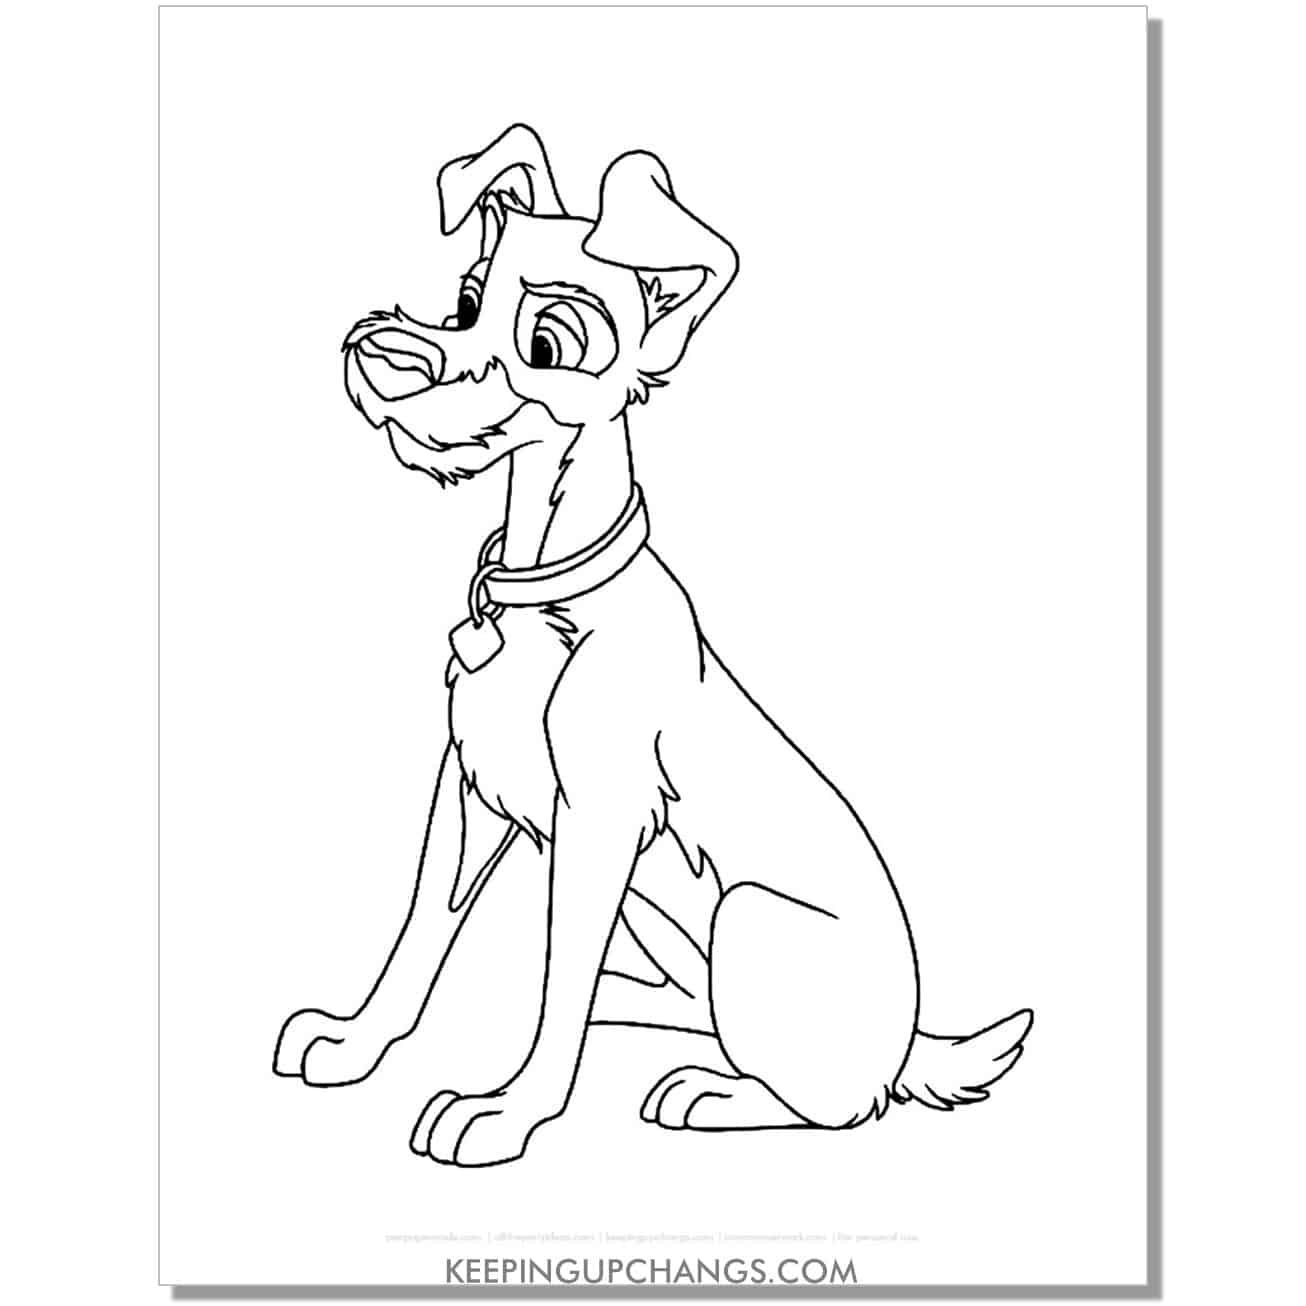 free tramp sitting from lady and the tramp coloring page, sheet.